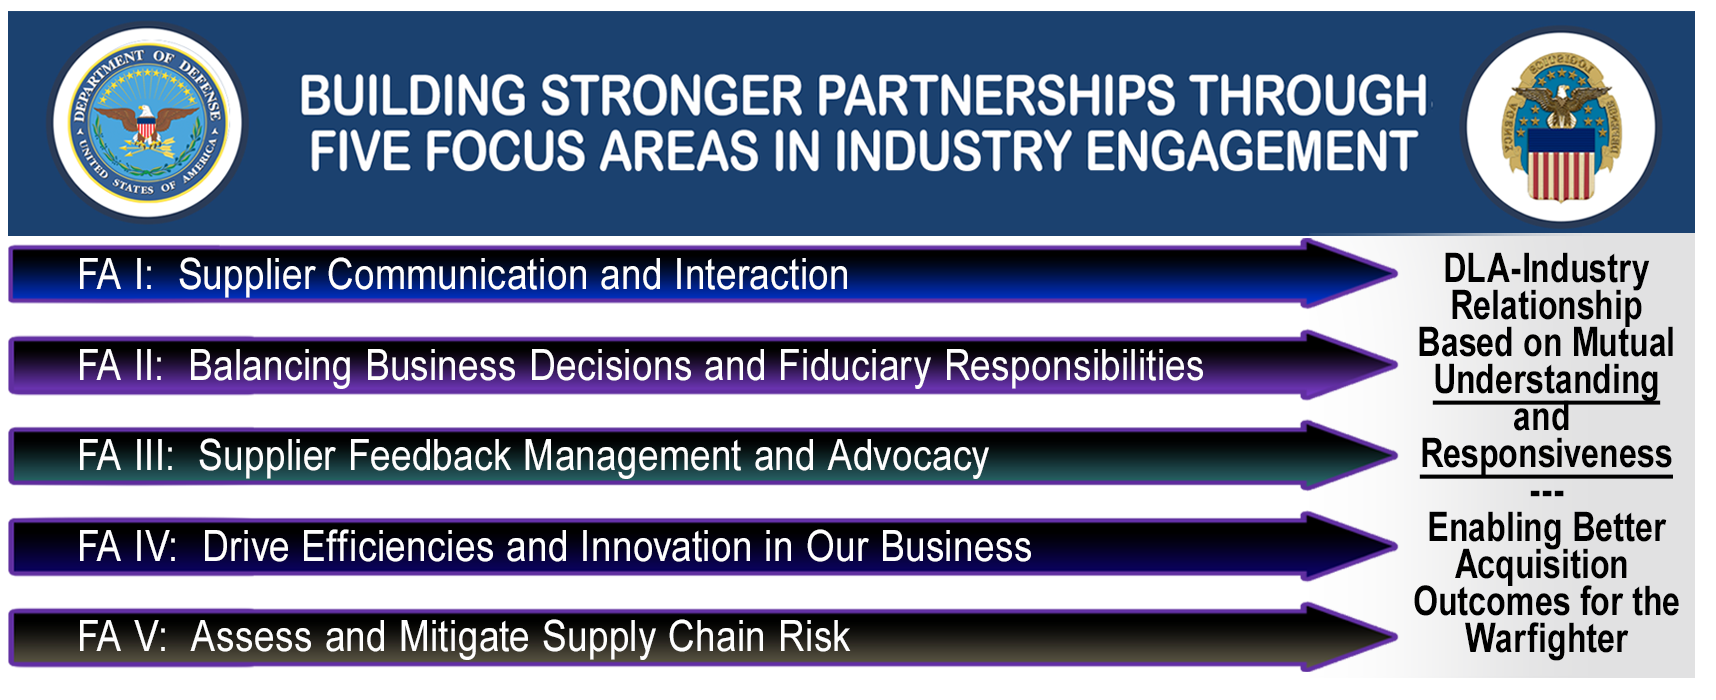 Each Industry Engagement Focus Area is listed